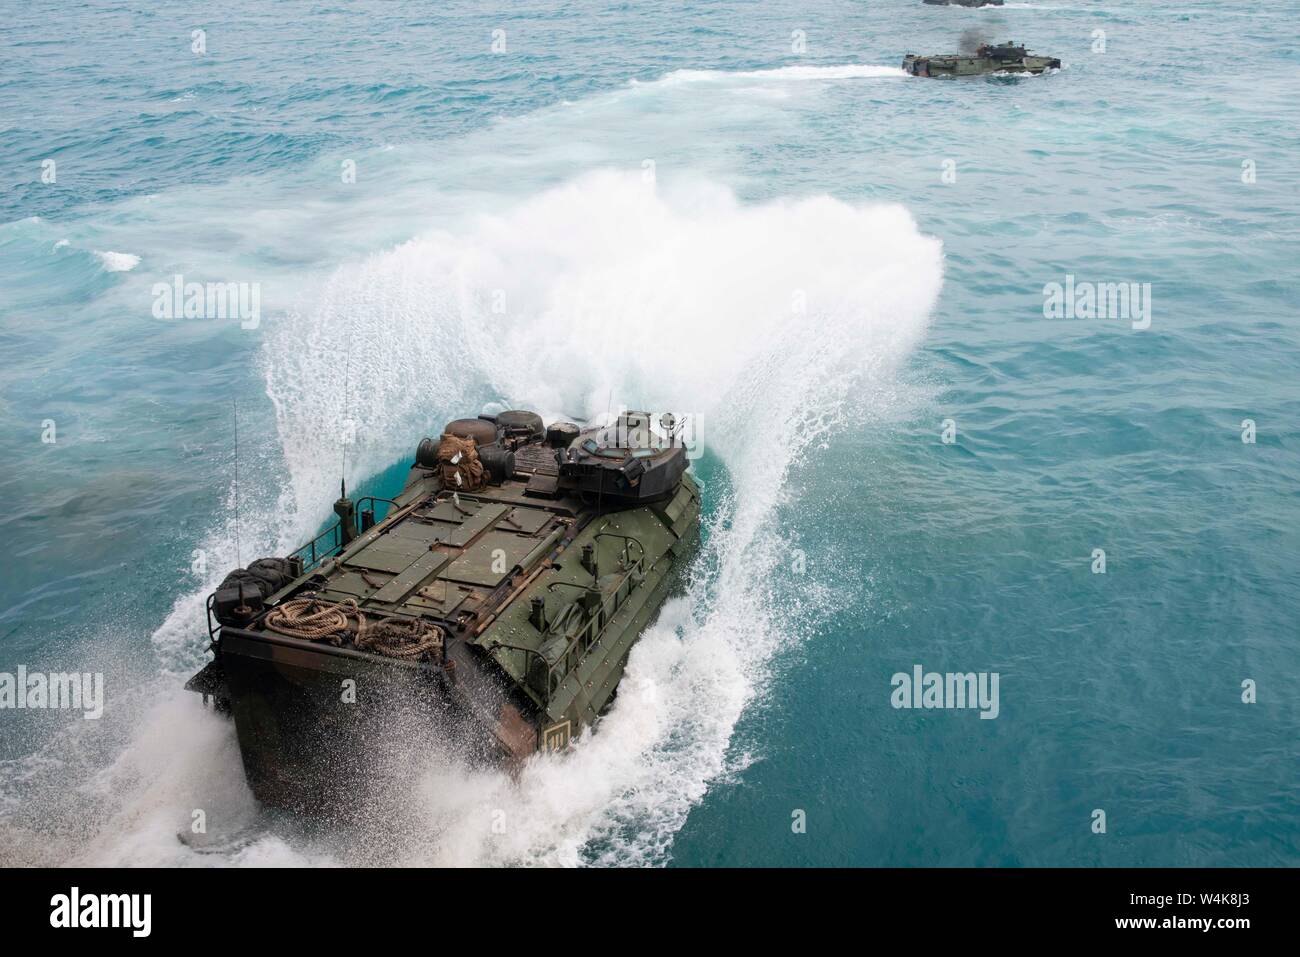 190722-N-DX072-1128 BOWEN, Australia (July 22, 2019) Assault amphibious vehicles (AAV), assigned to the 31st Marine Expeditionary Unit (MEU), depart the well deck of the amphibious transport dock ship USS Green Bay (LPD 20). Green Bay, part of the Wasp Expeditionary Strike Group, with embarked 31st MEU, is currently participating in Talisman Sabre 2019 off the coast of Northern Australia. A bilateral, biennial event, Talisman Sabre is designed to improve U.S. and Australian combat training, readiness and interoperability through realistic, relevant training necessary to maintain regional secur Stock Photo